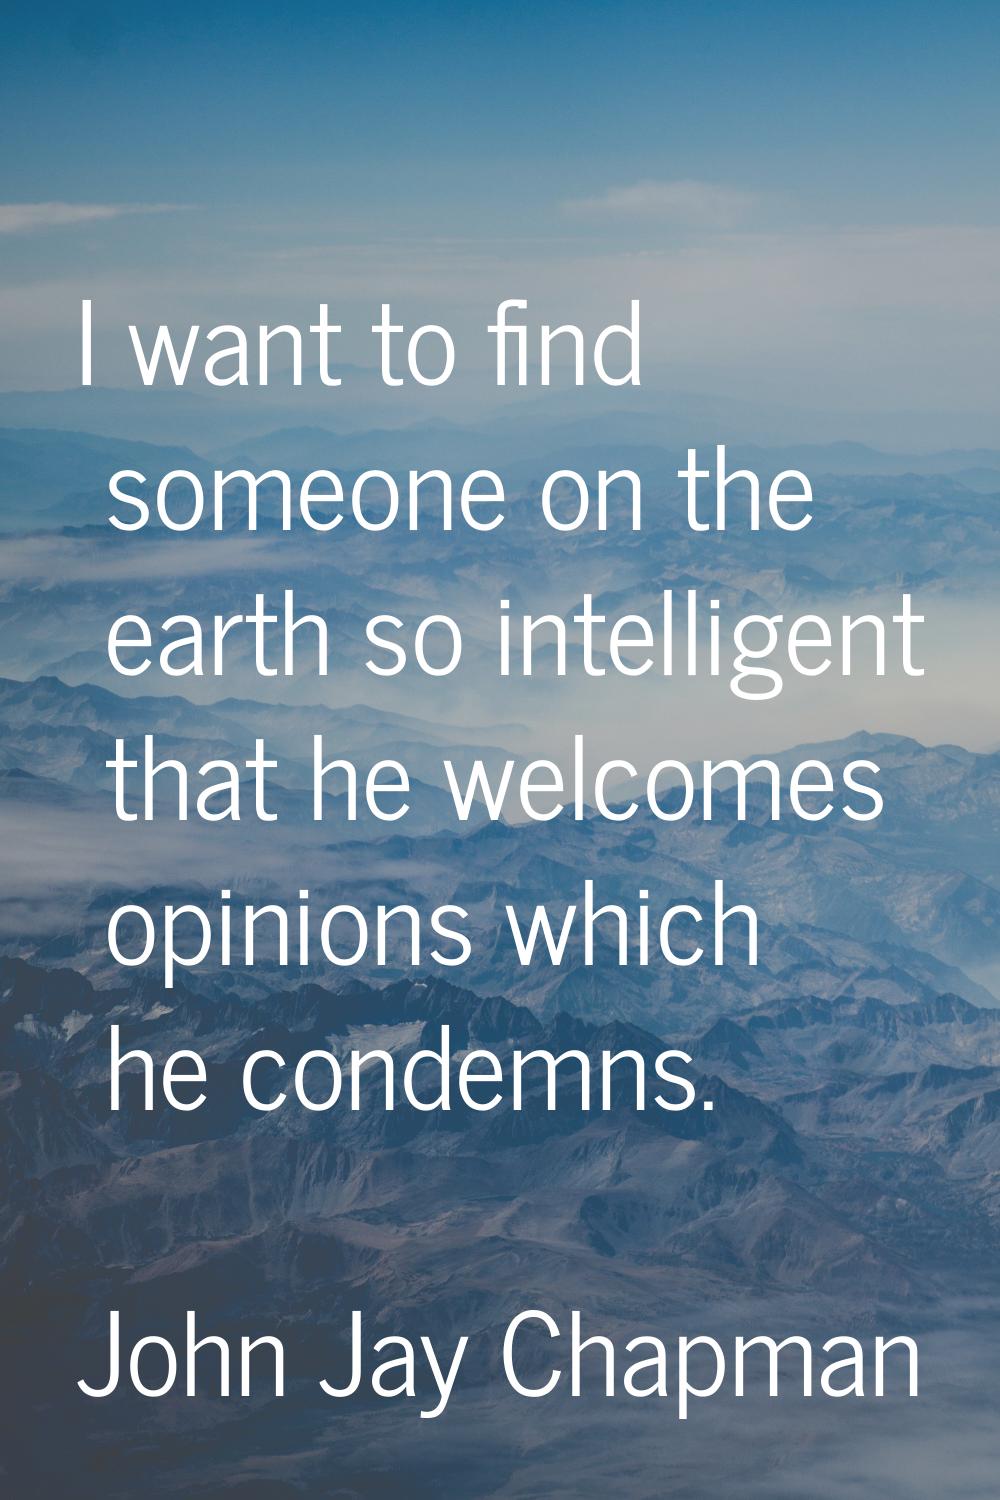 I want to find someone on the earth so intelligent that he welcomes opinions which he condemns.